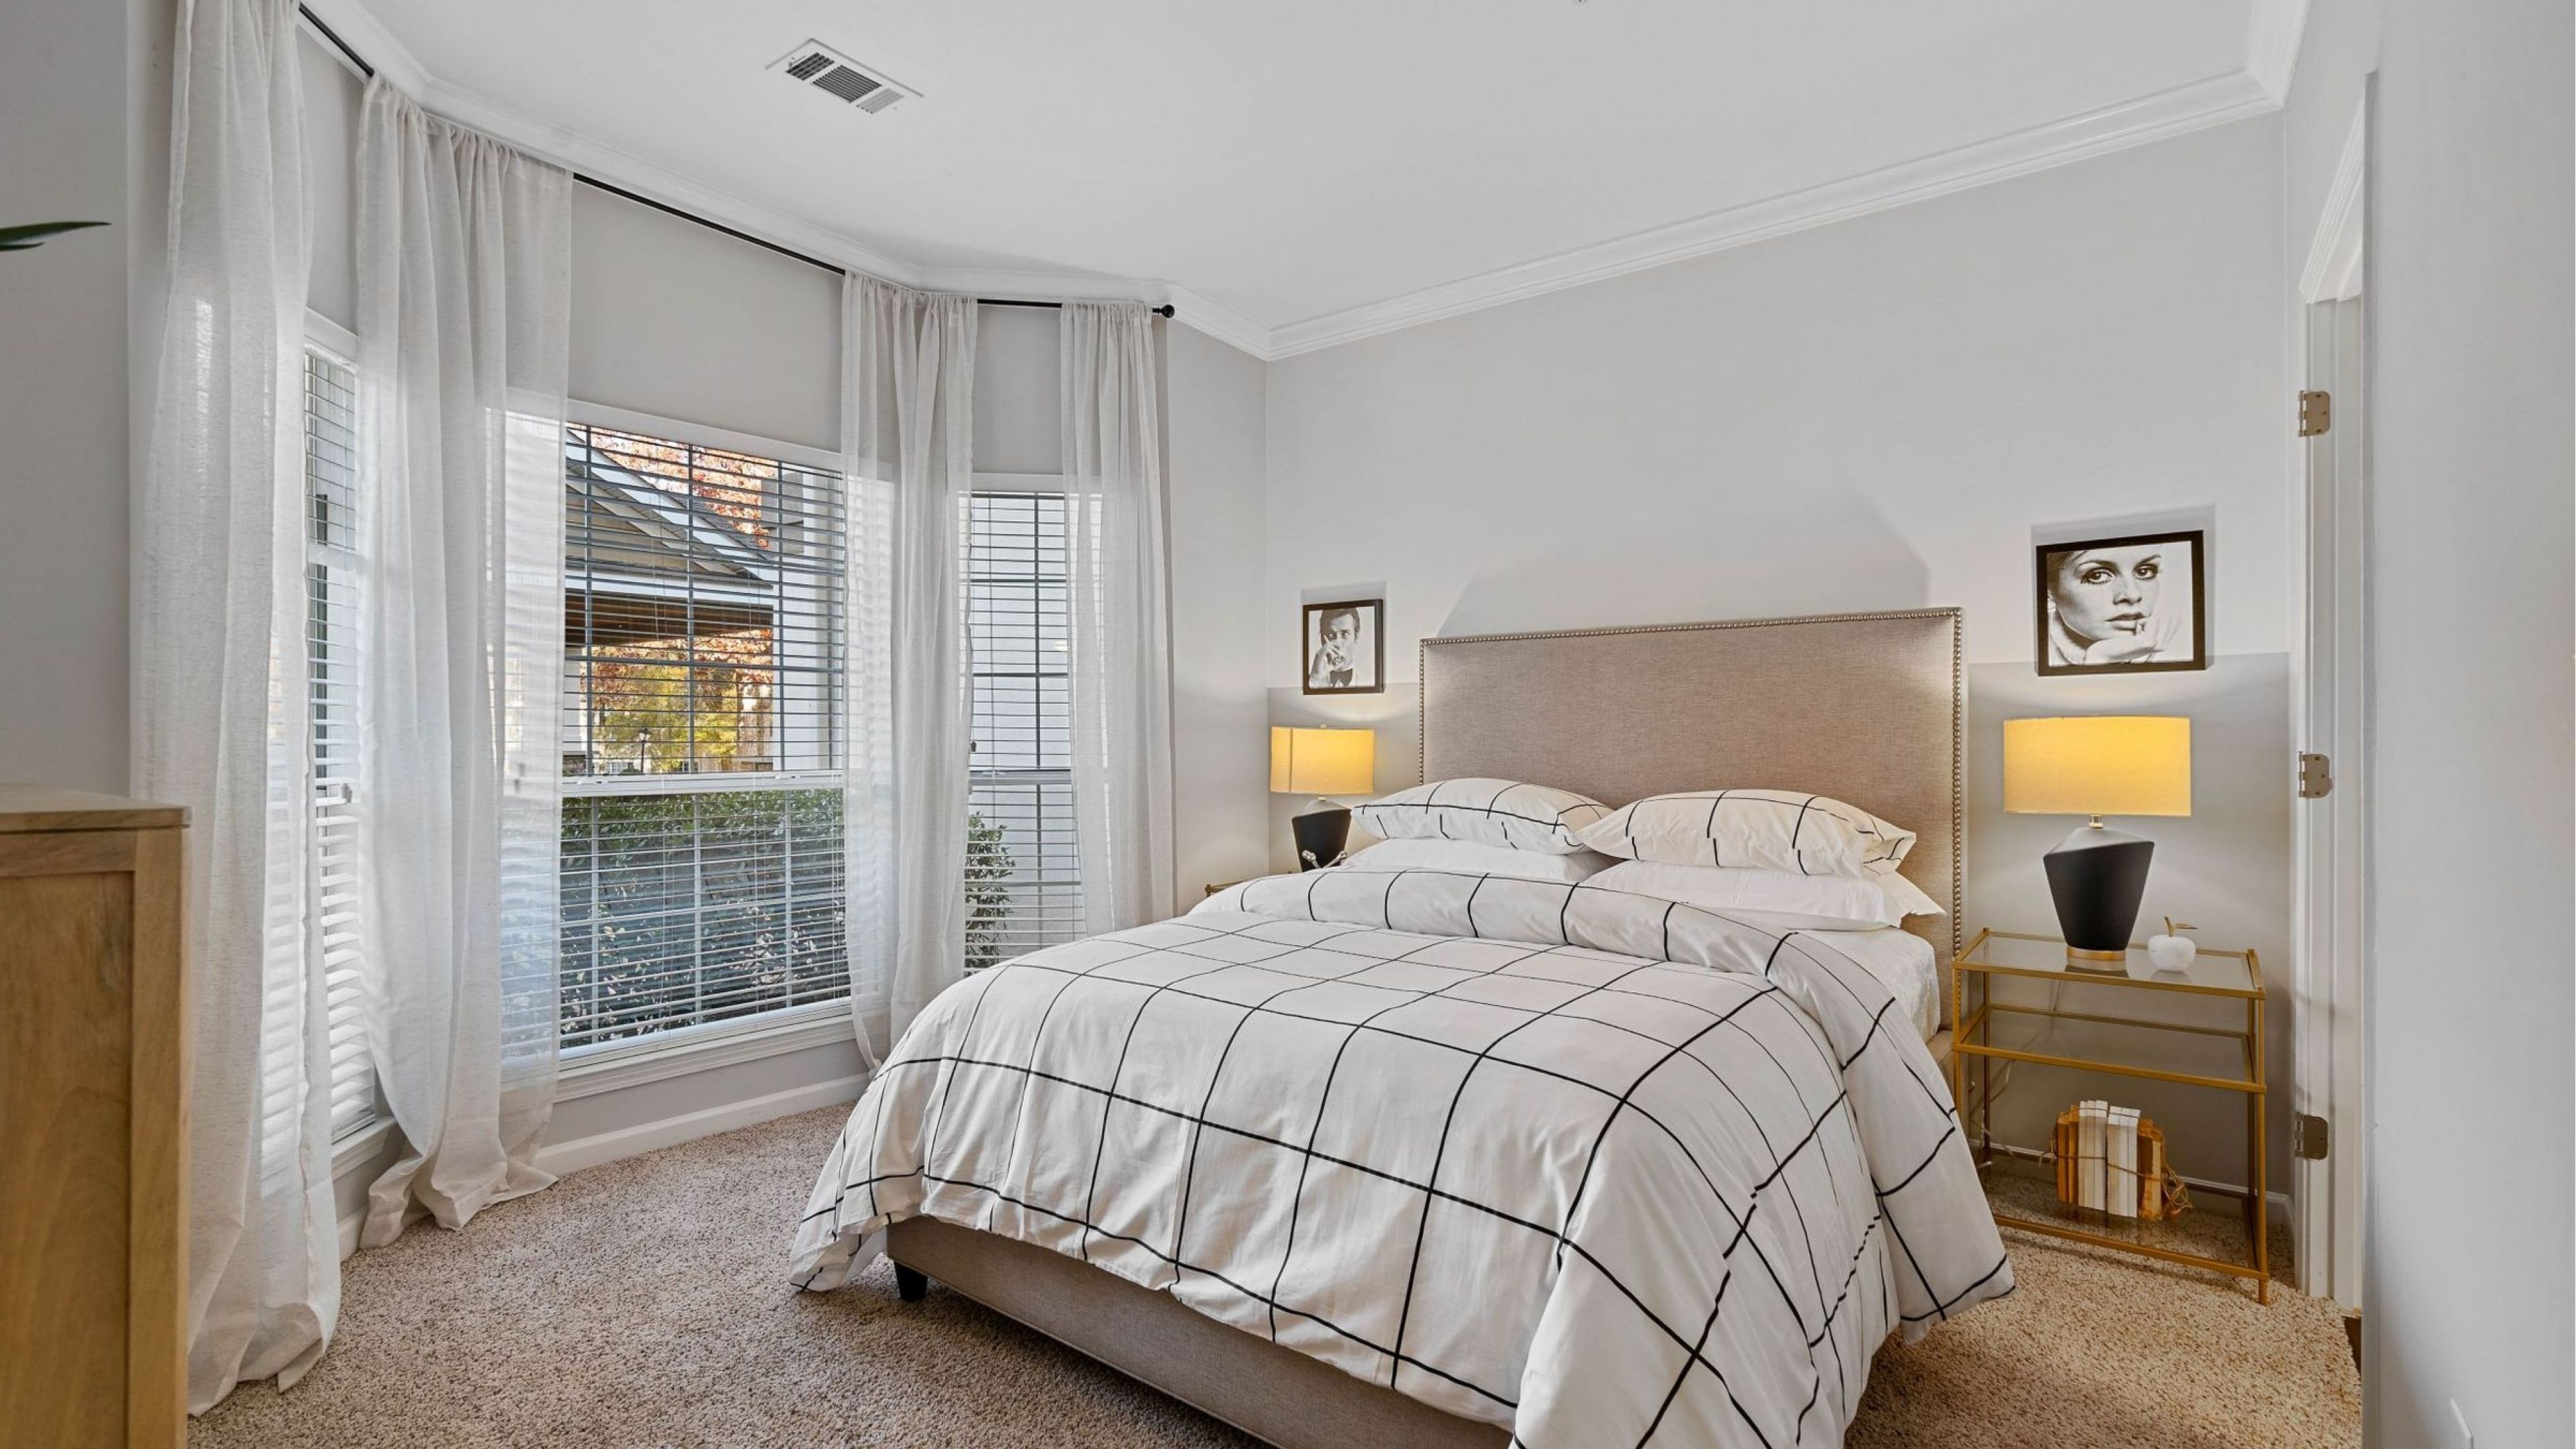 Hawthorne at the Carlyle spacious carpeted bedroom with large bay window with ample natural light.